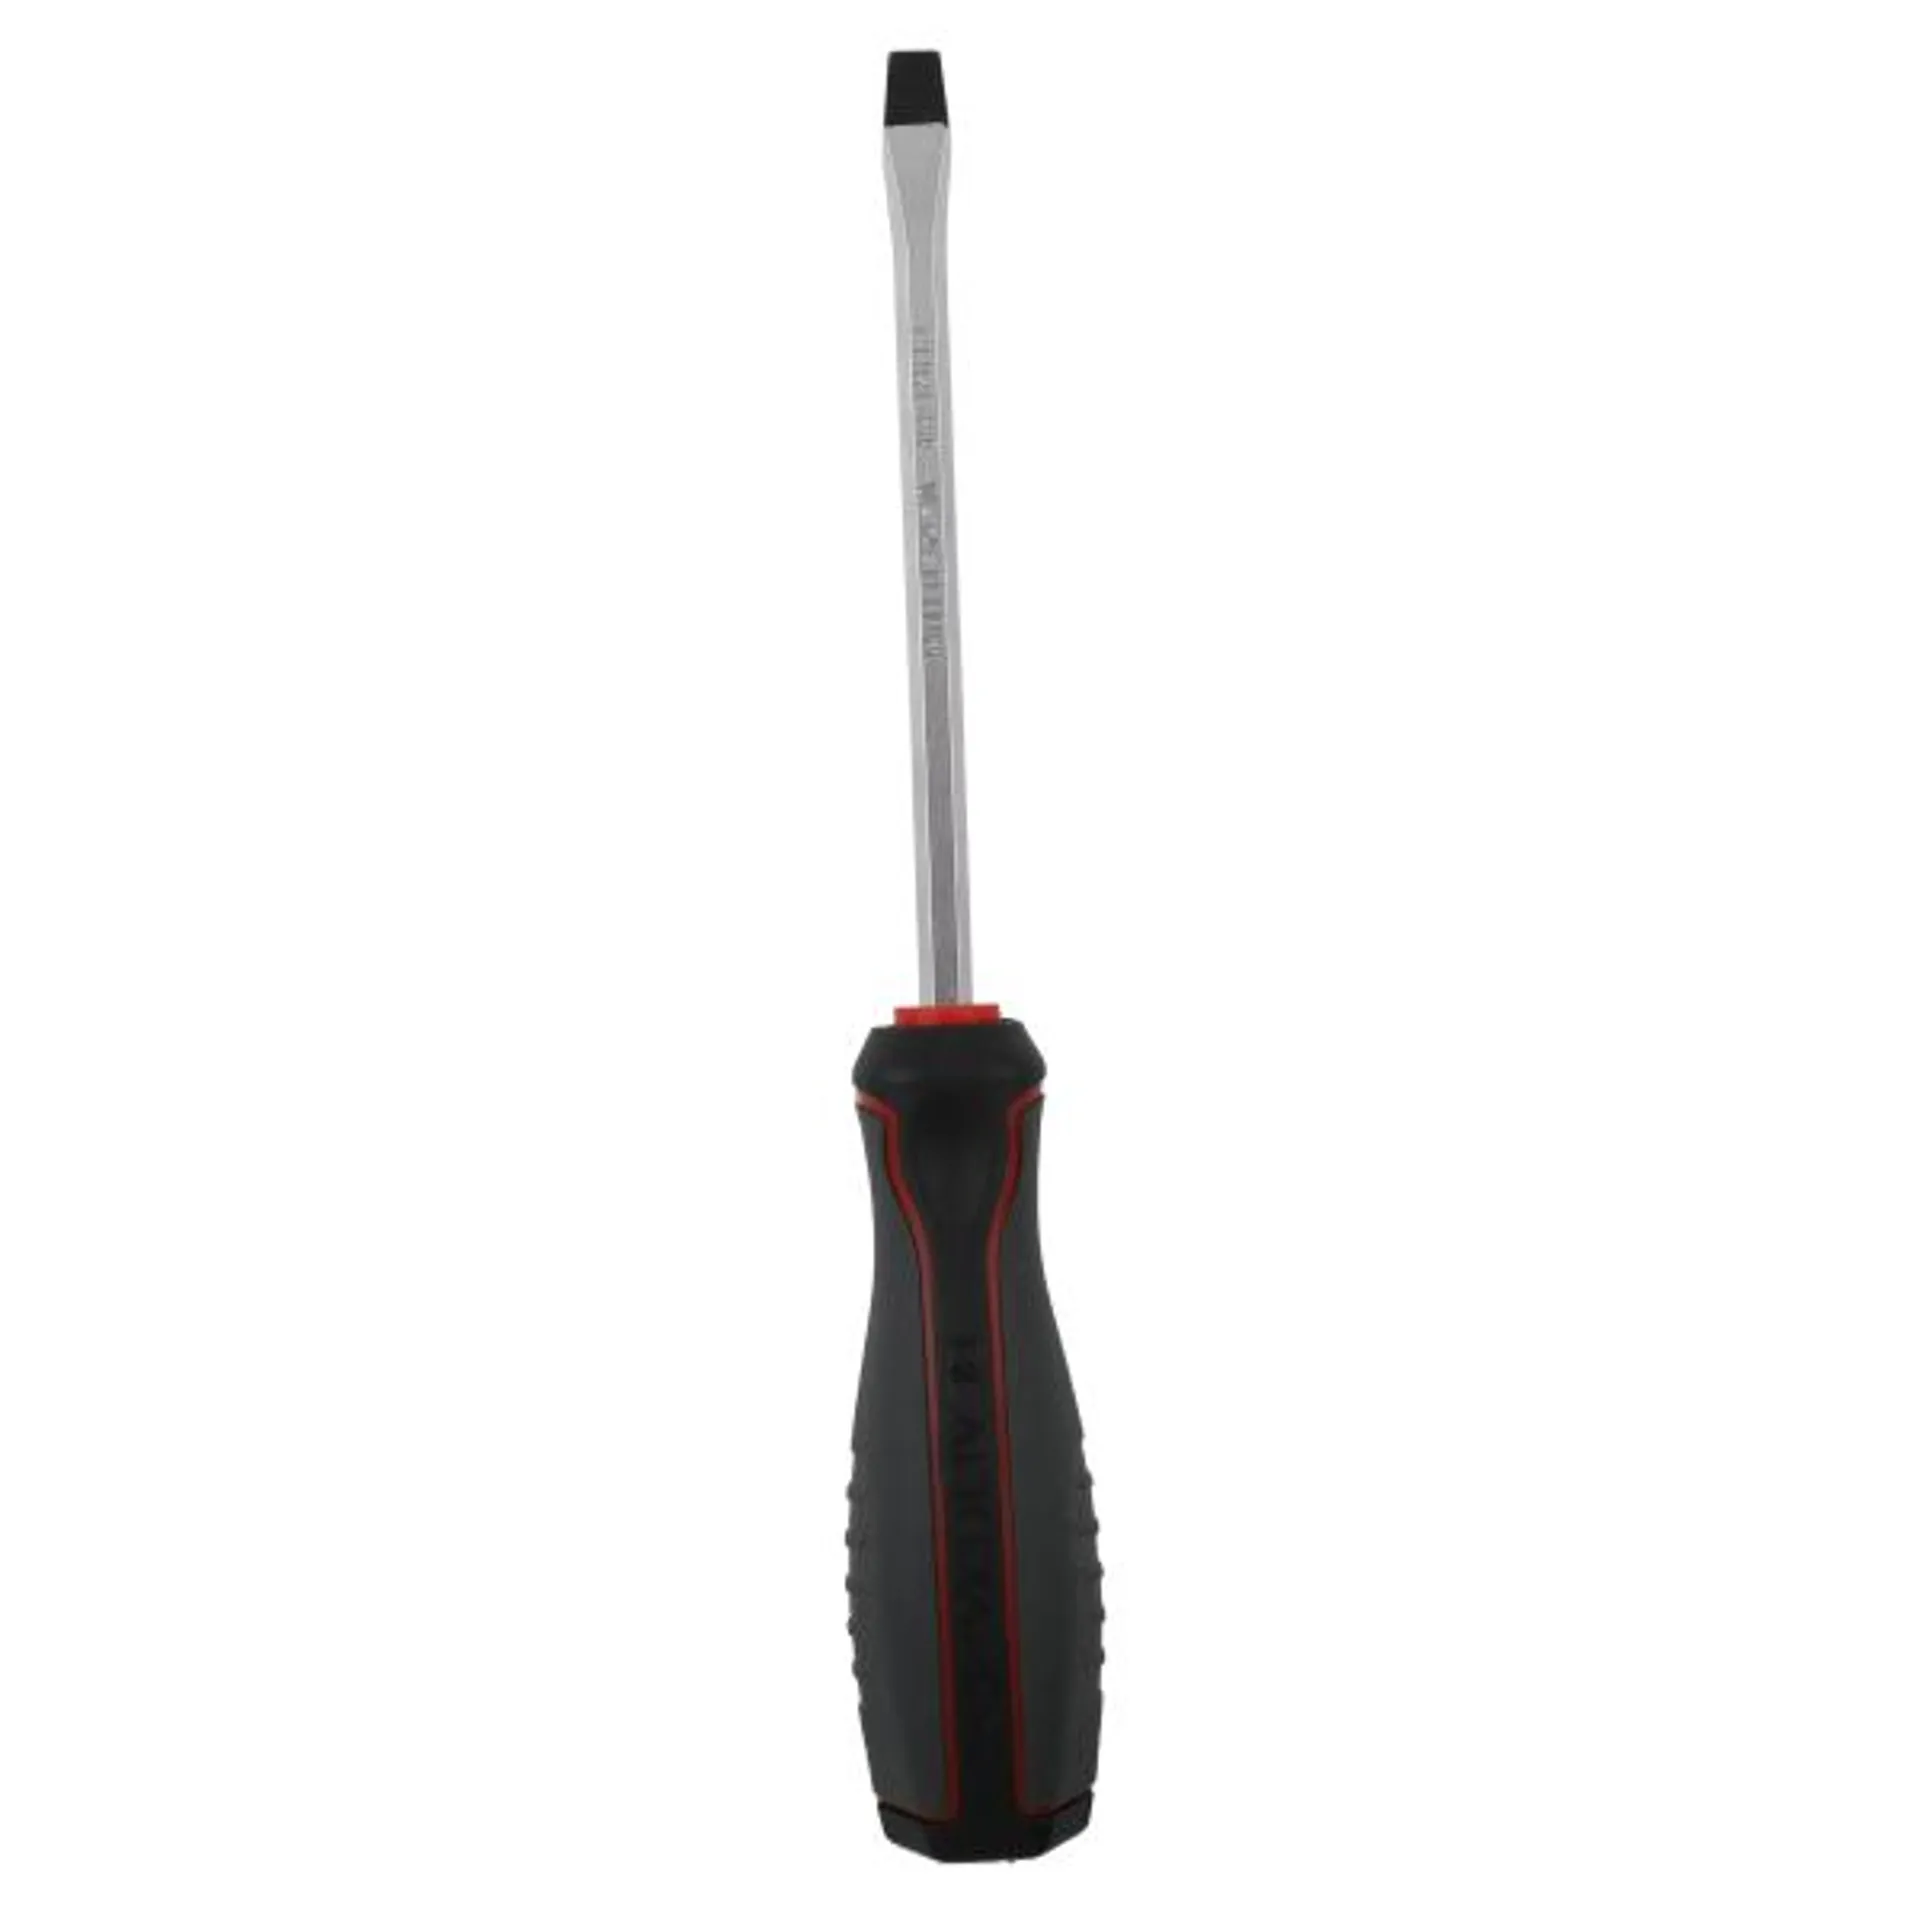 3/16" X 4" Slotted Comfort Grip Screwdriver